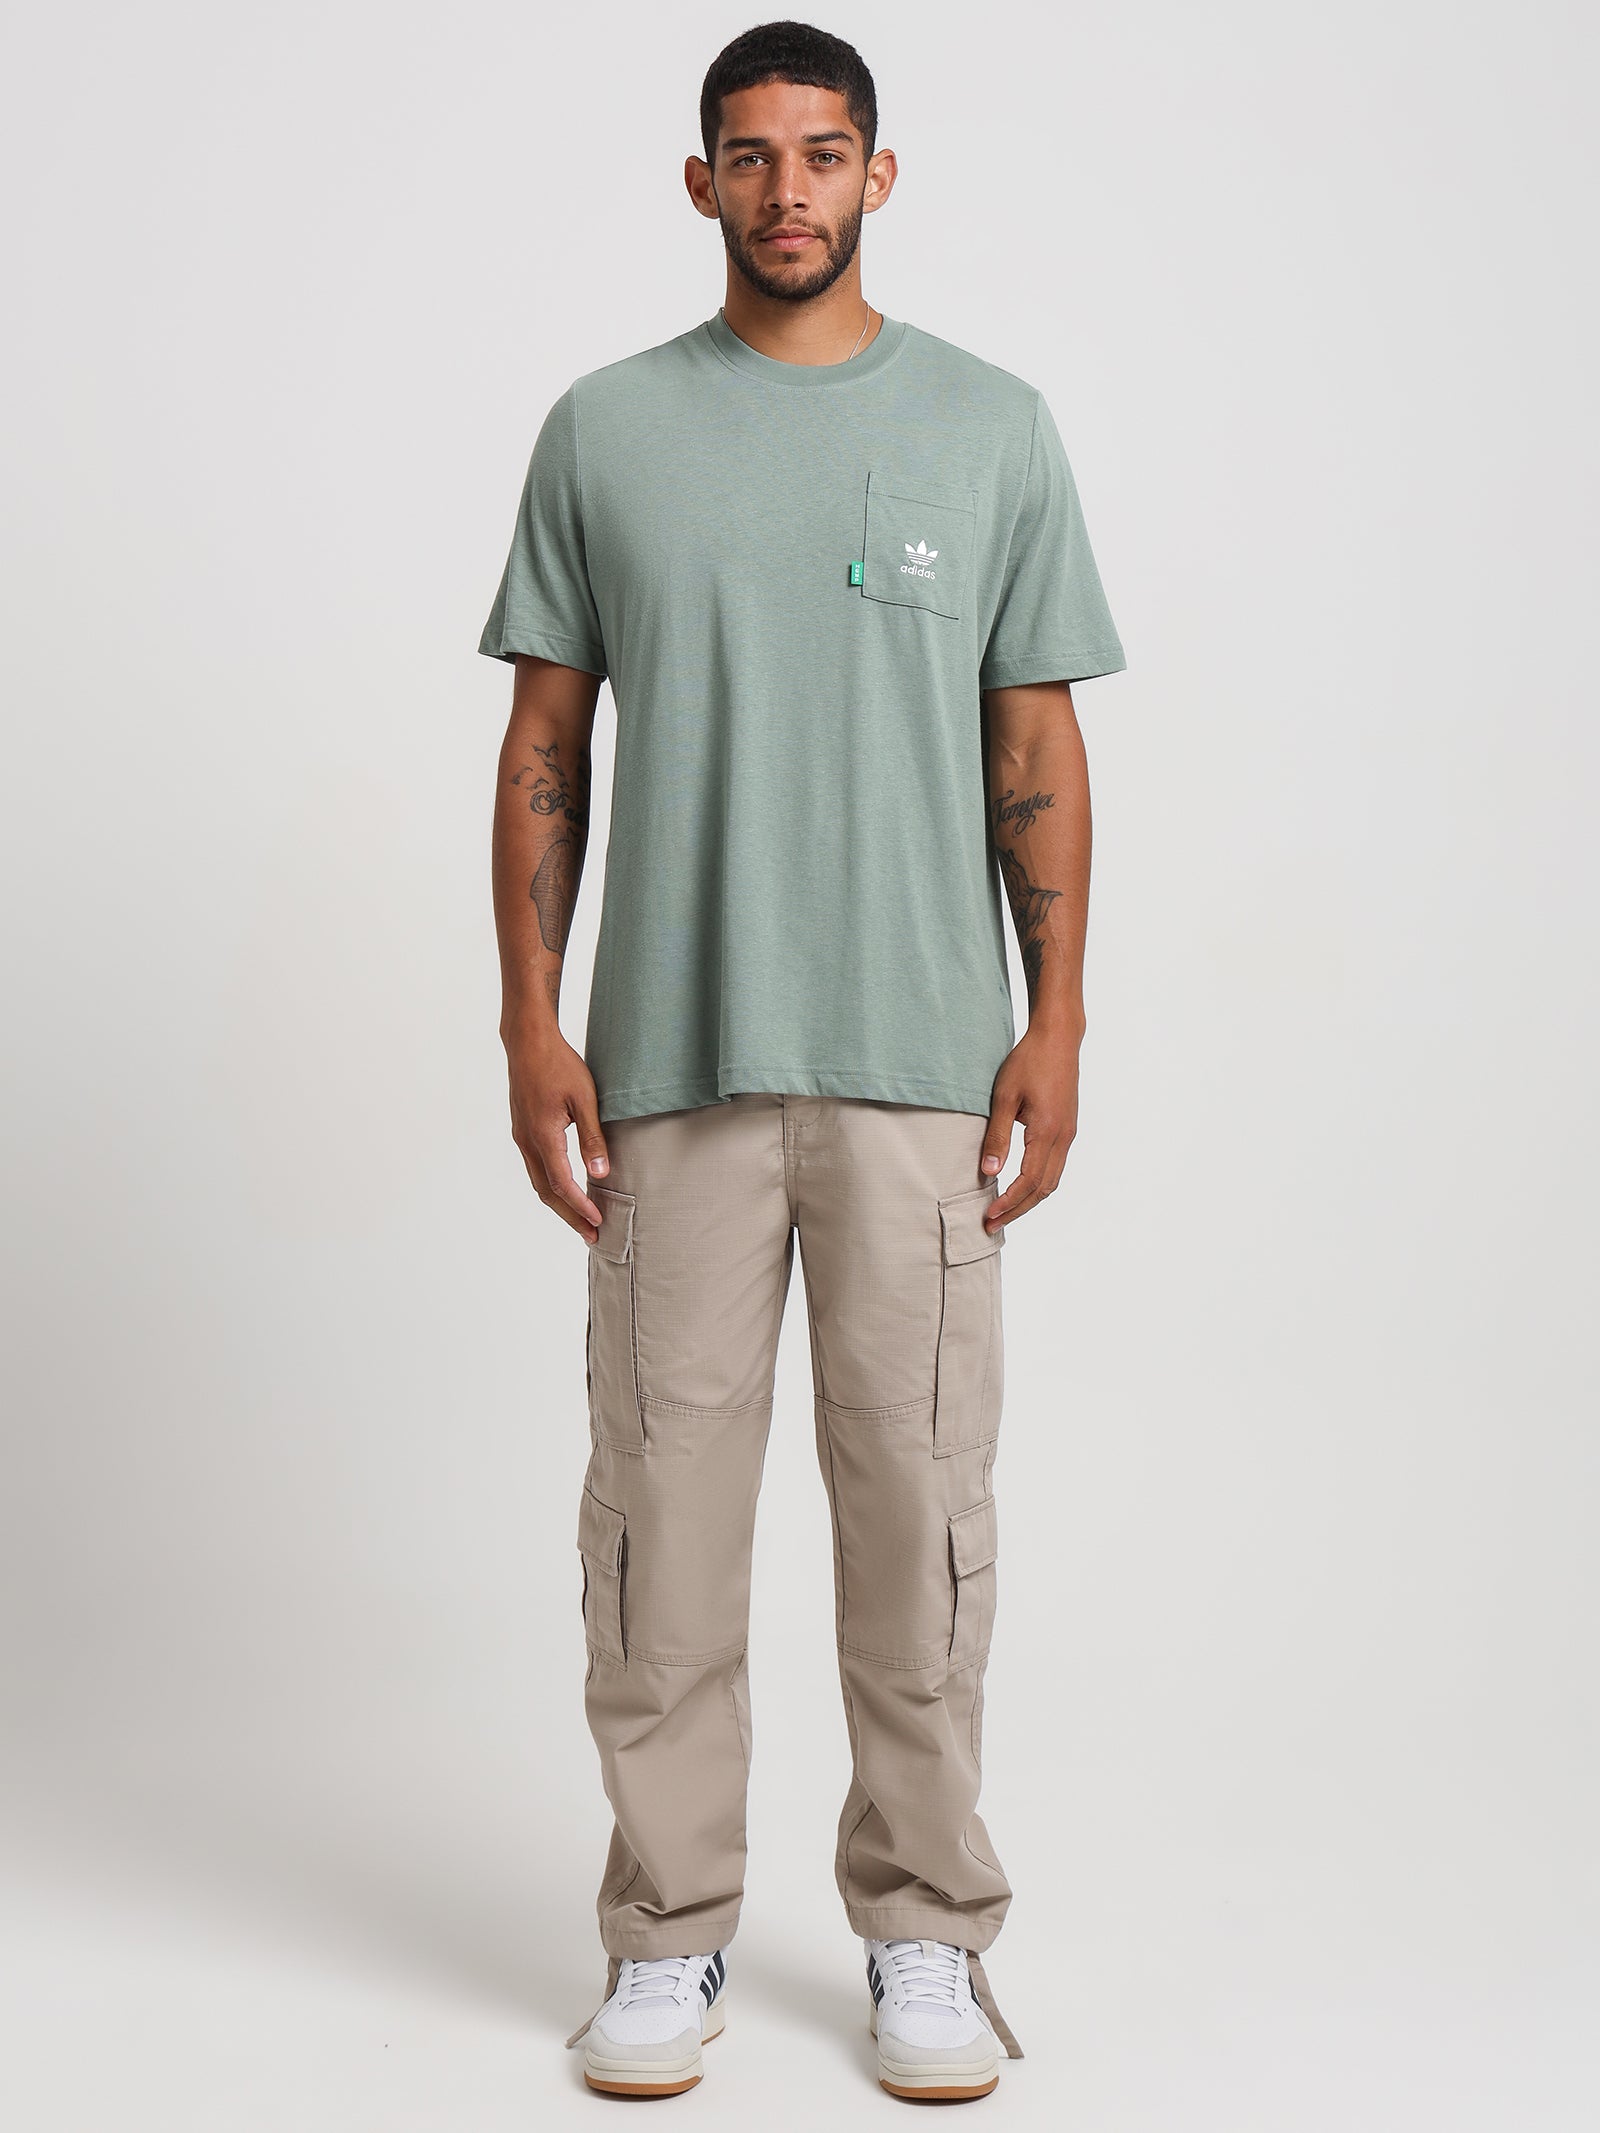 Essentials+ Made With Hemp T-Shirt in Silver Green - Glue Store